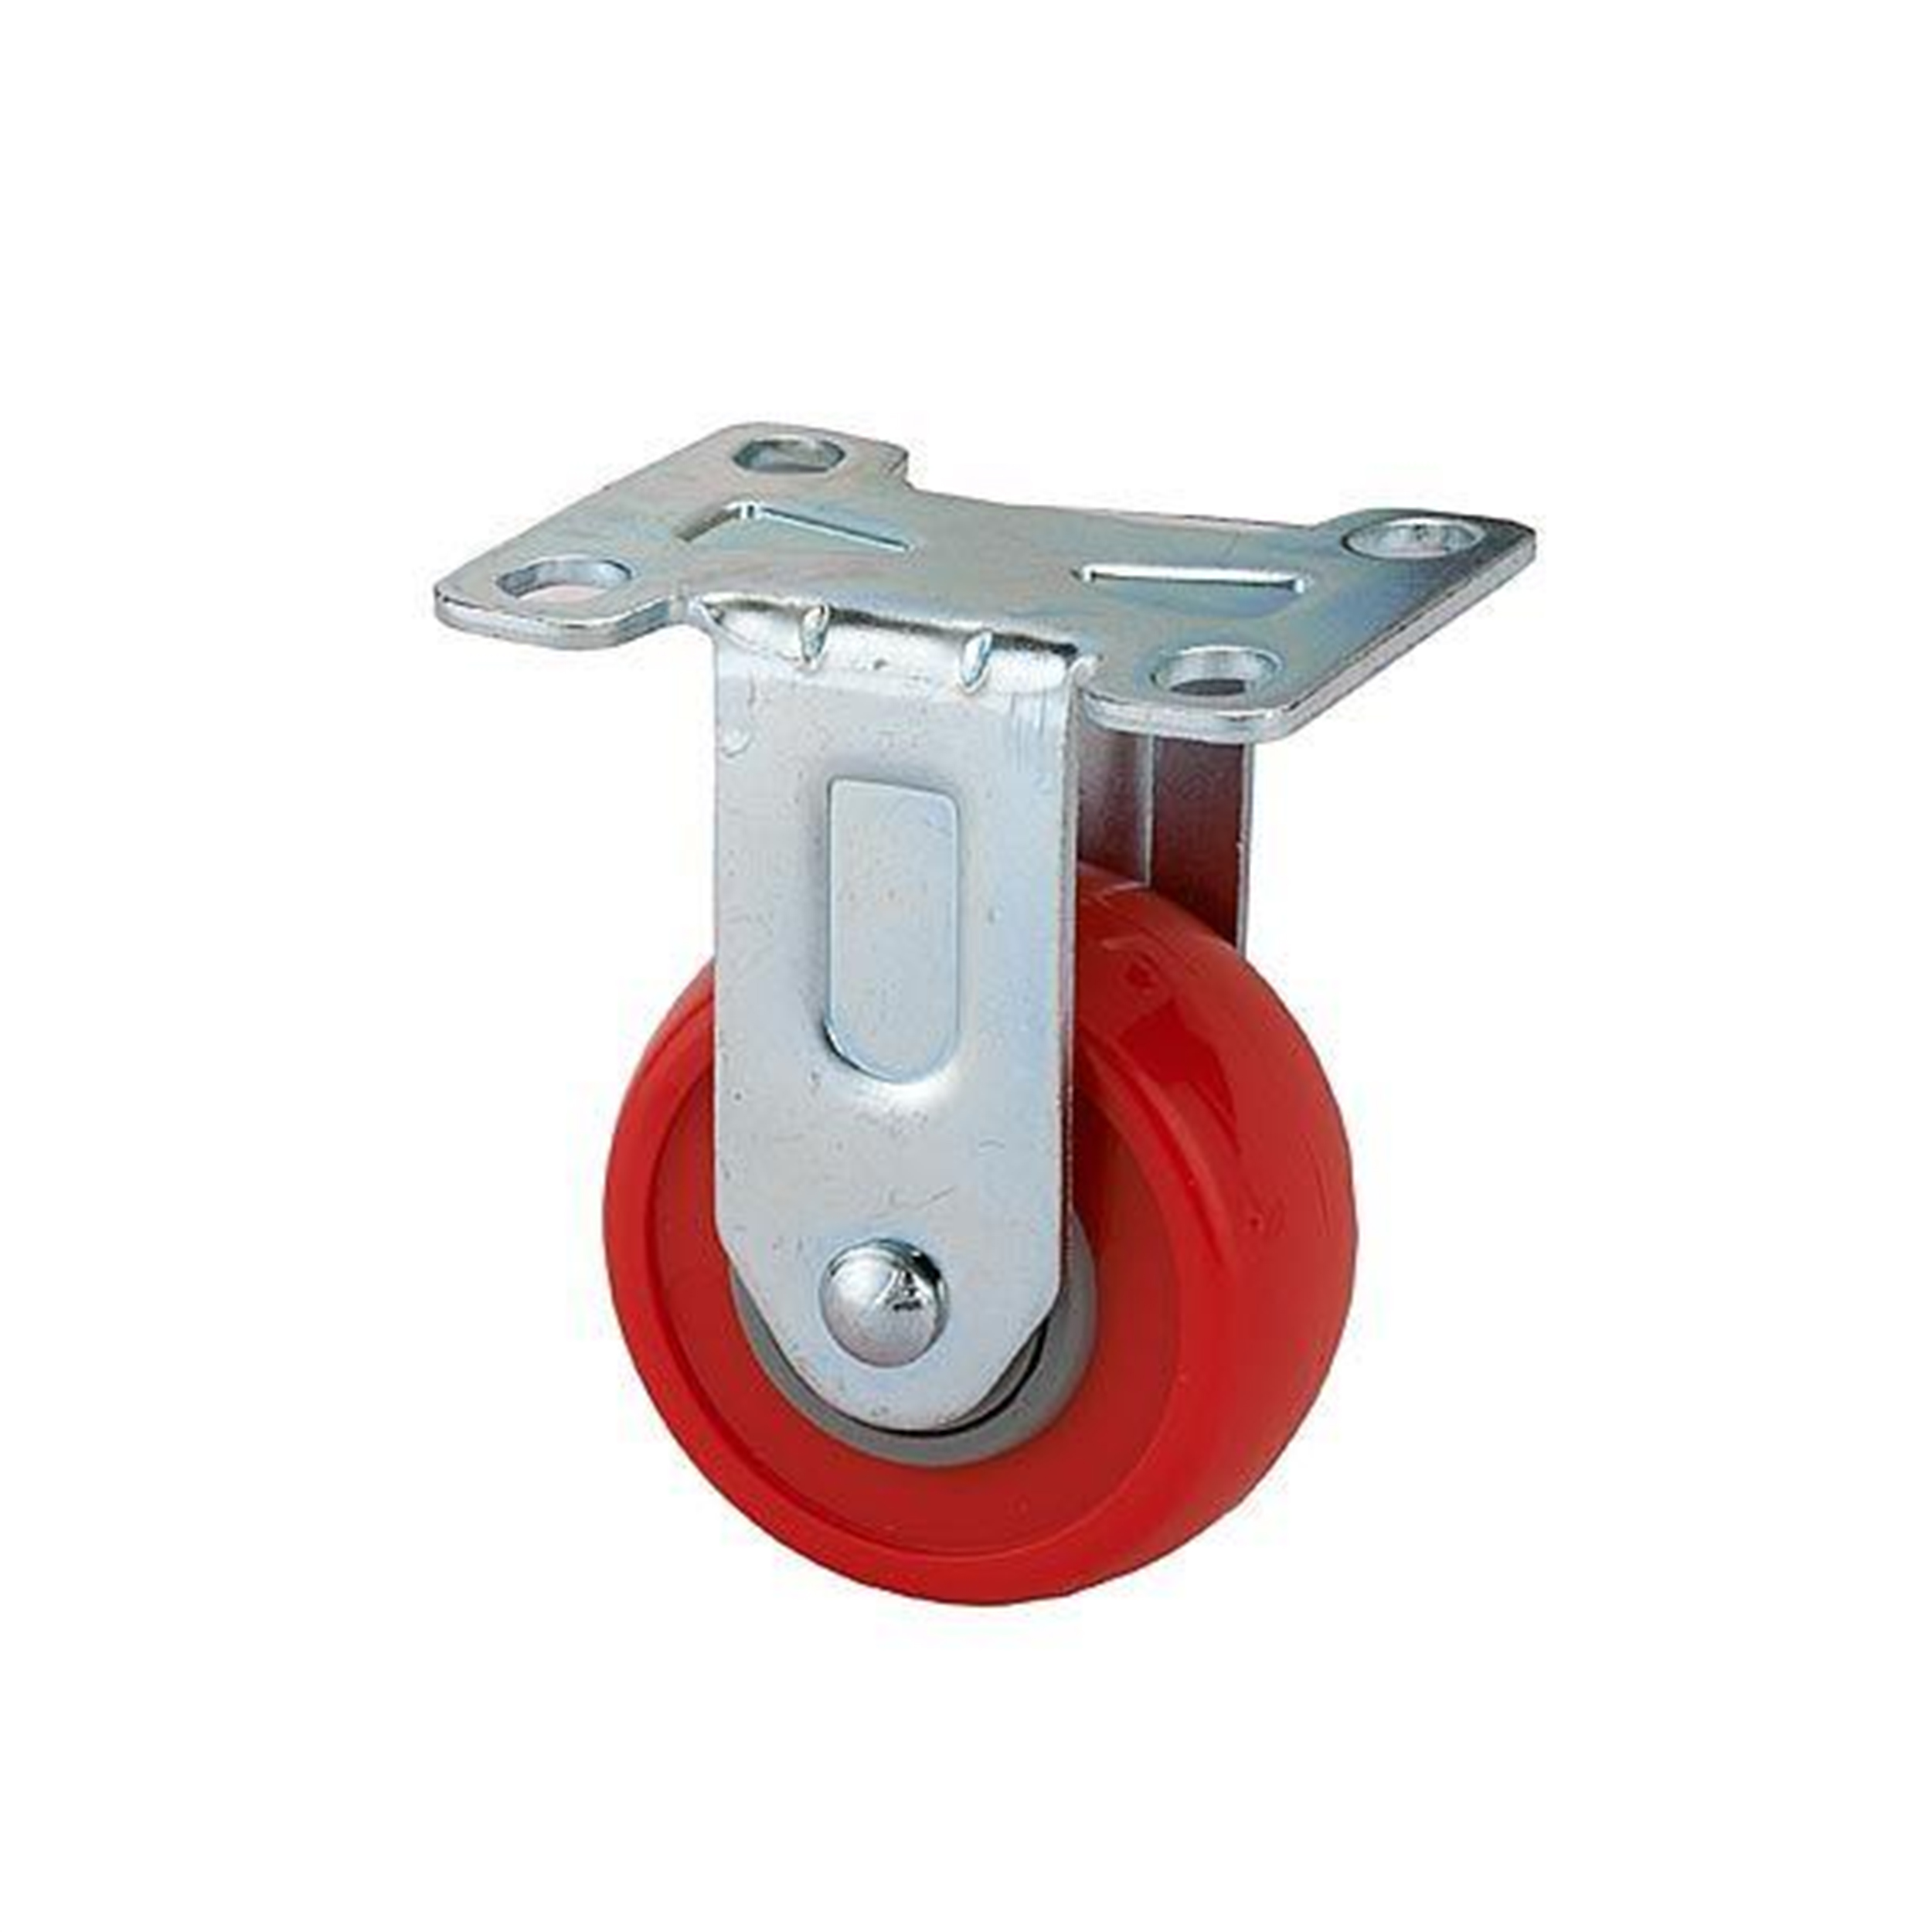 2-1/2" Caster, Fixed Plate With 4-hole Mounting, 3-3/8" Tall